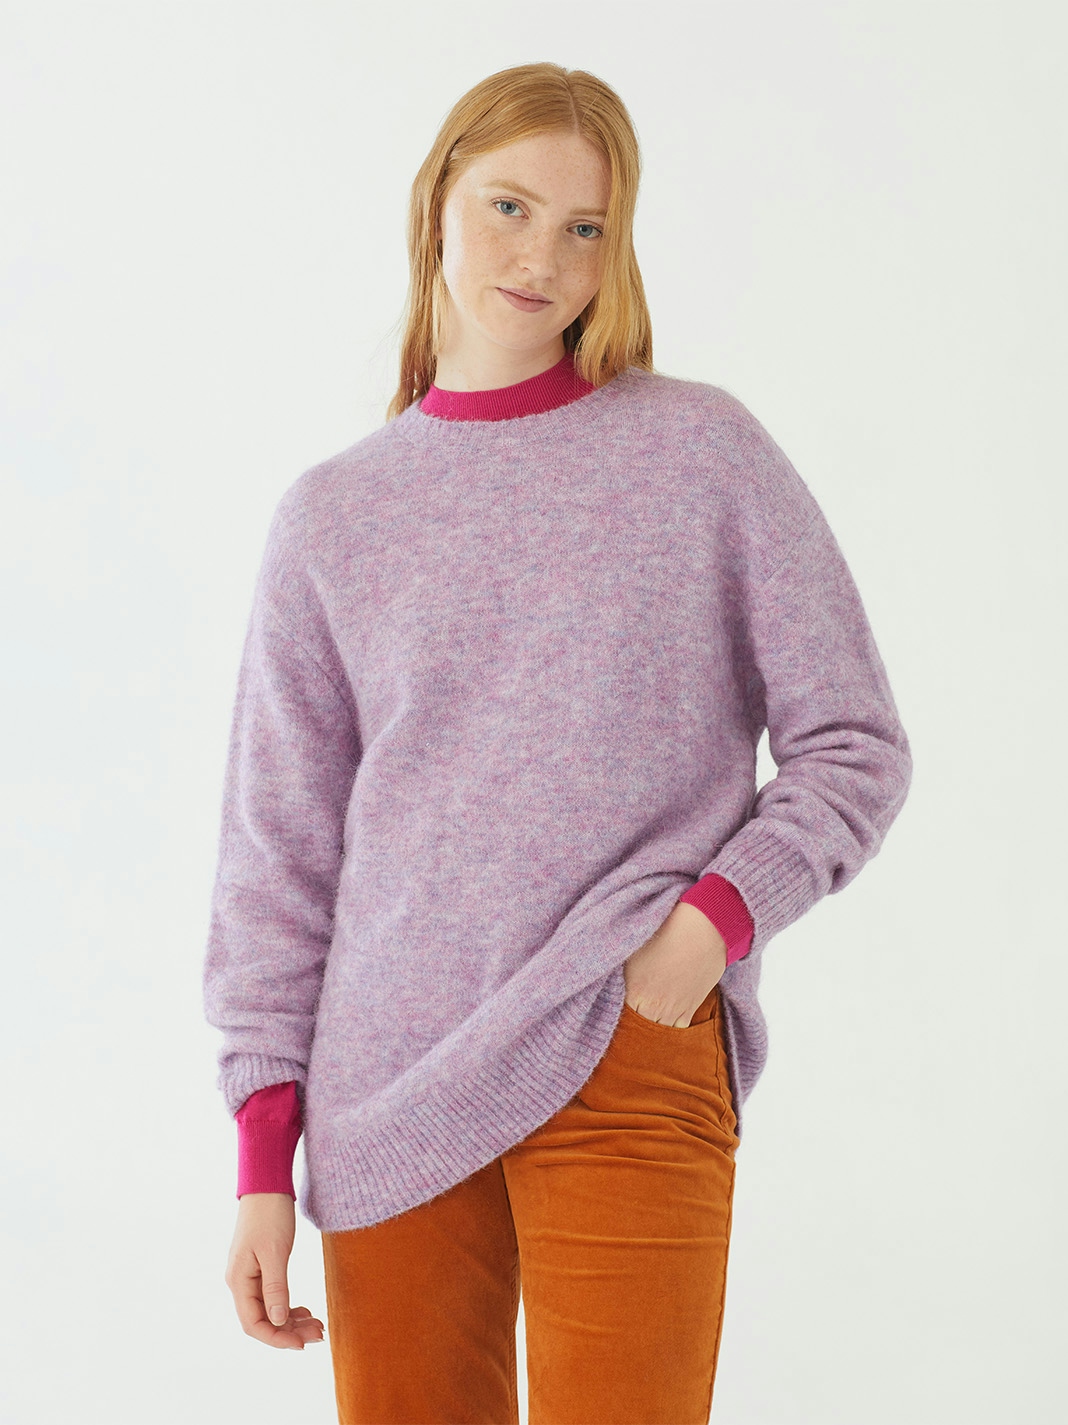 Sweater oversize marbled